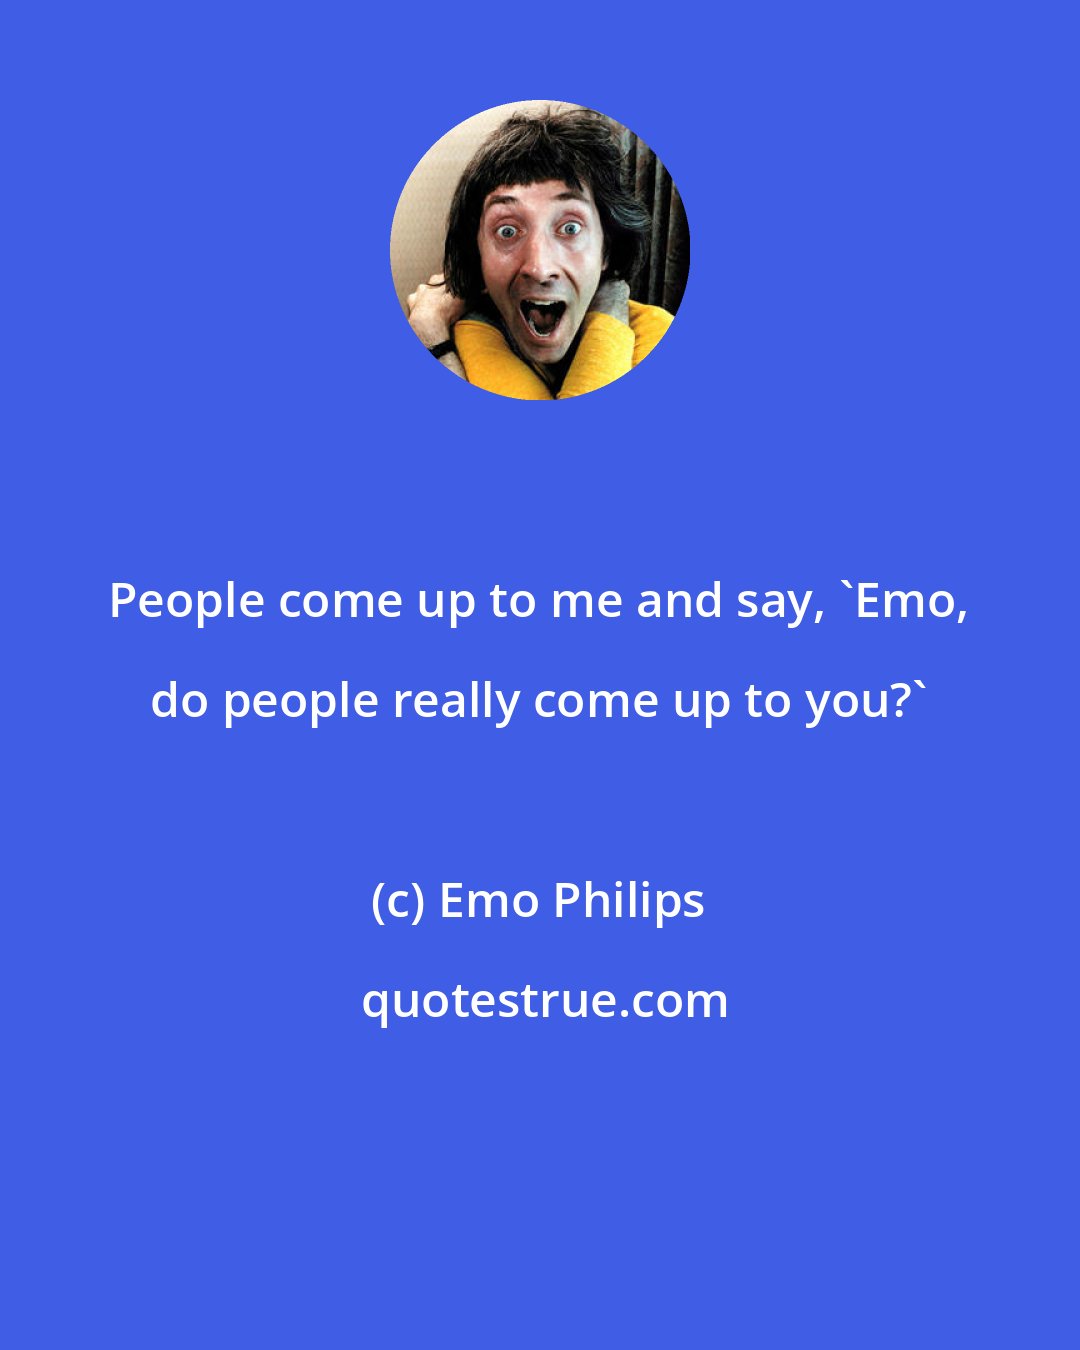 Emo Philips: People come up to me and say, 'Emo, do people really come up to you?'